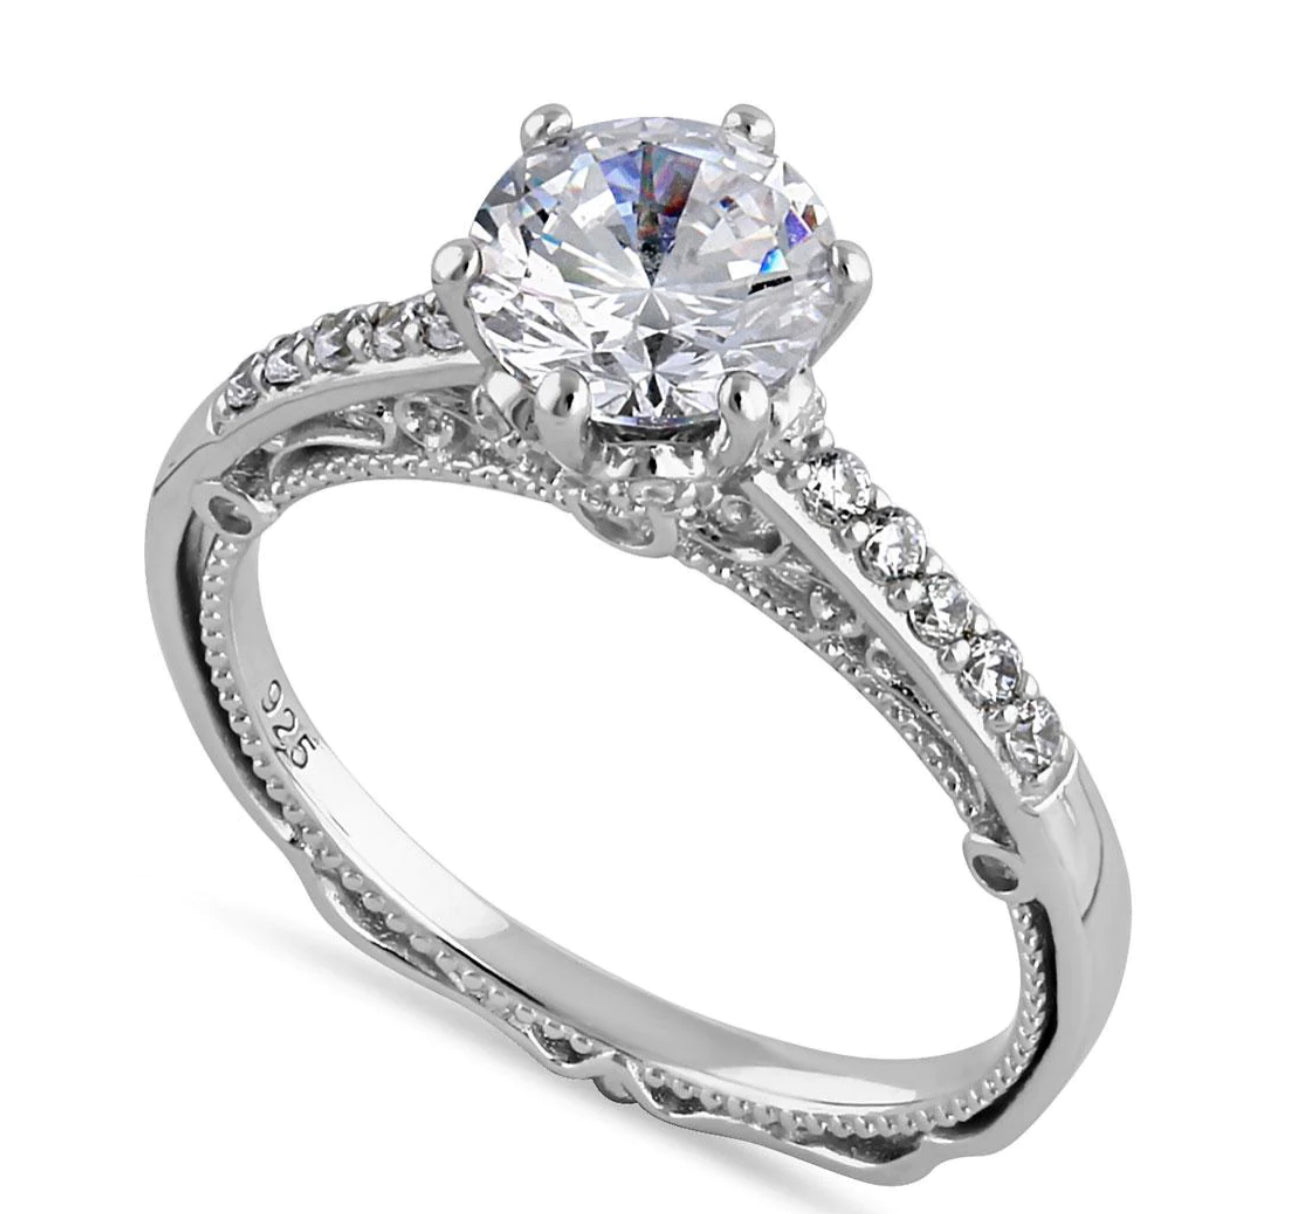 Unique Vintage Diamond Engagement Rings  - every girls loves sparkles